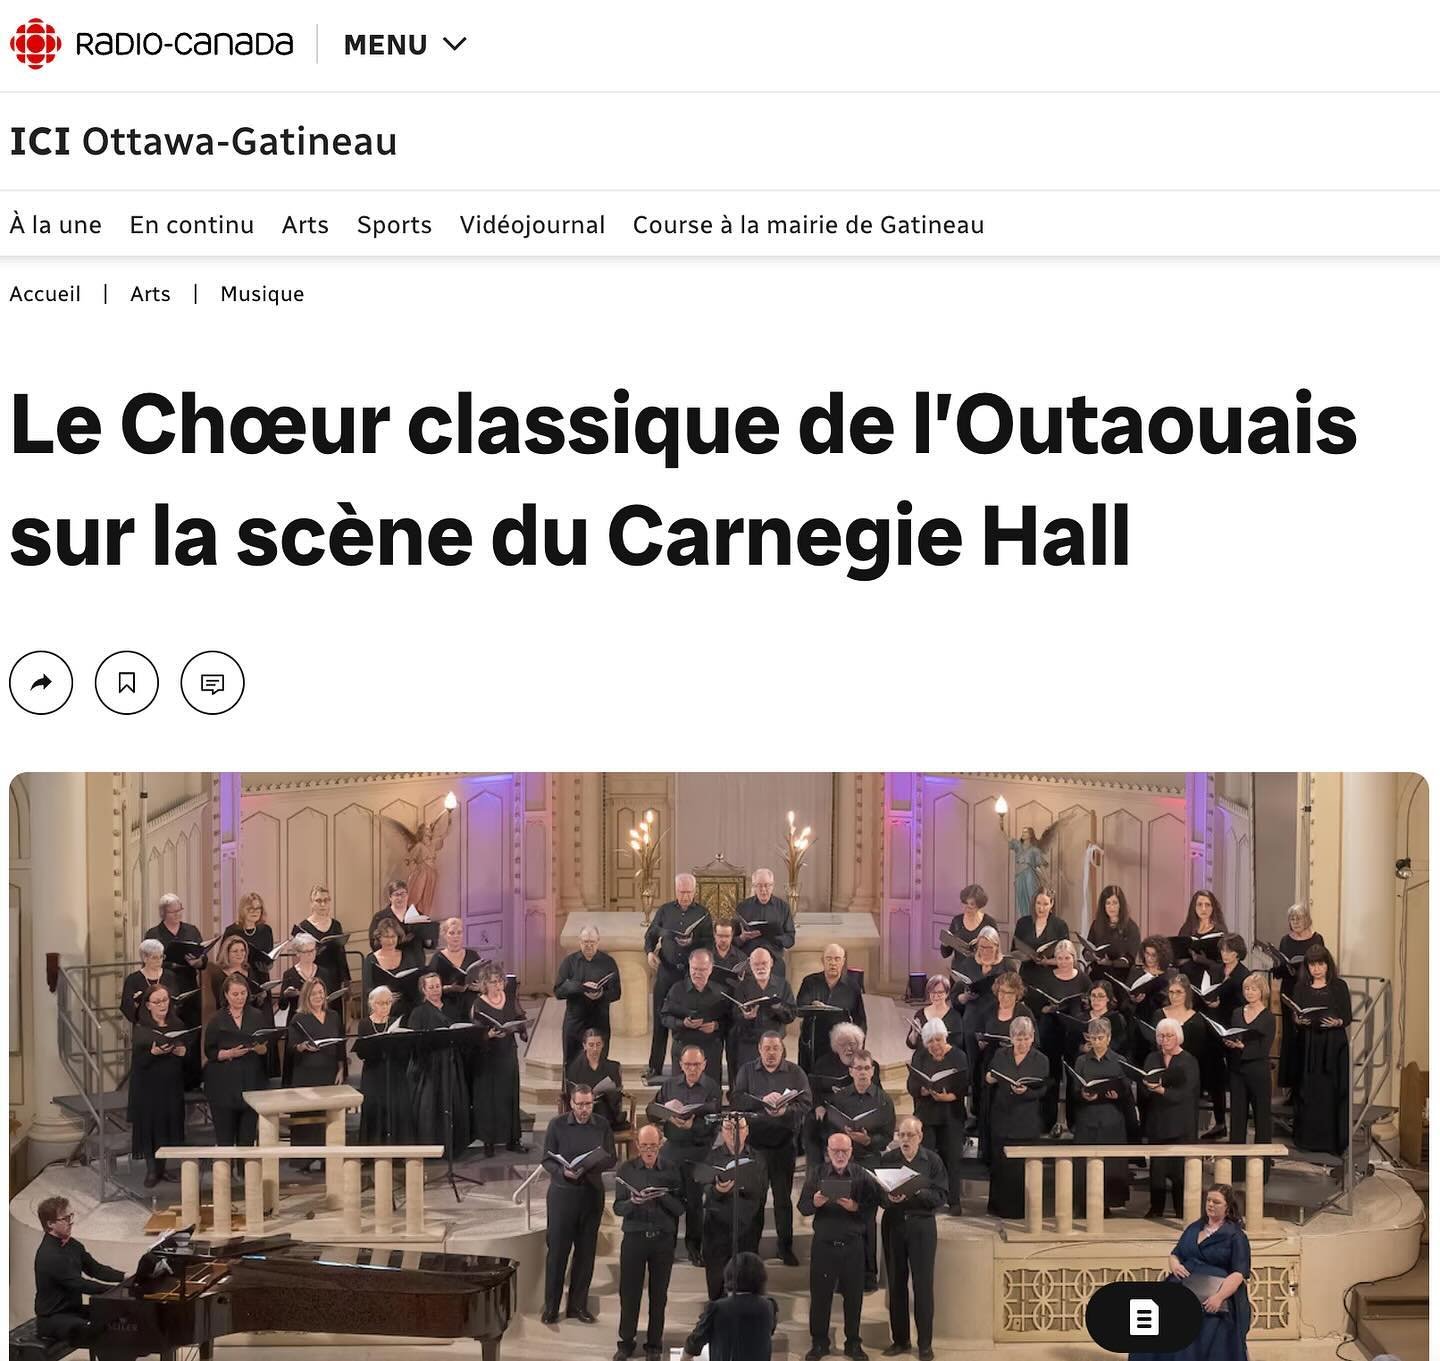 Big thanks to @radiocanada for sharing Ch&oelig;ur classique de l&rsquo;Outaouais upcoming performance at @carnegiehall on Monday, May 27, 2024. Get your ticket today!
#choralmusic #choralsinging #carnegiehall #gatineau #gatineauottawa